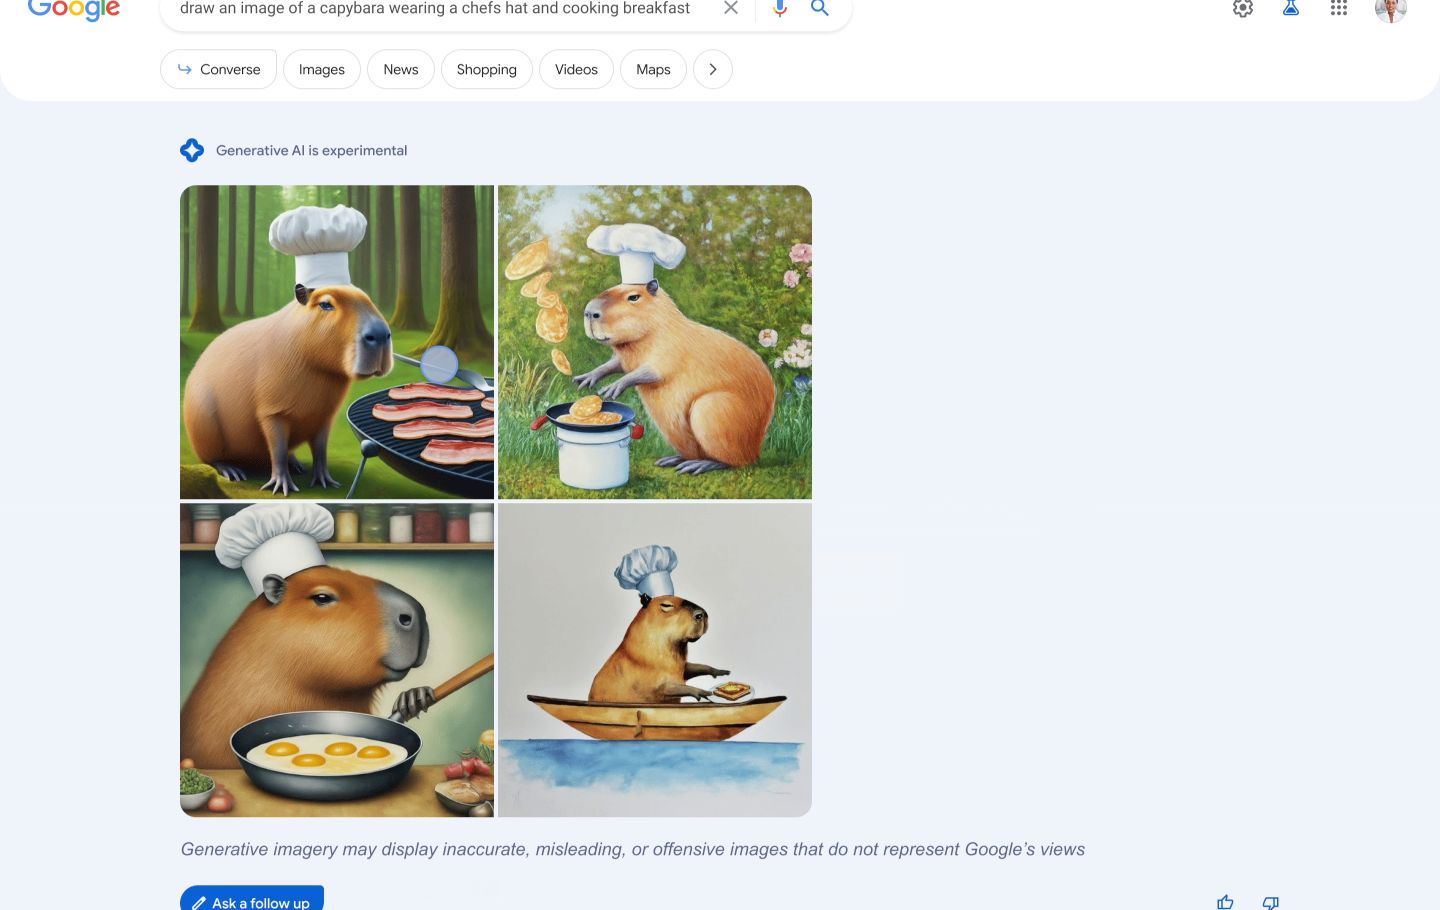 Google tests AI-generated images and documents in search